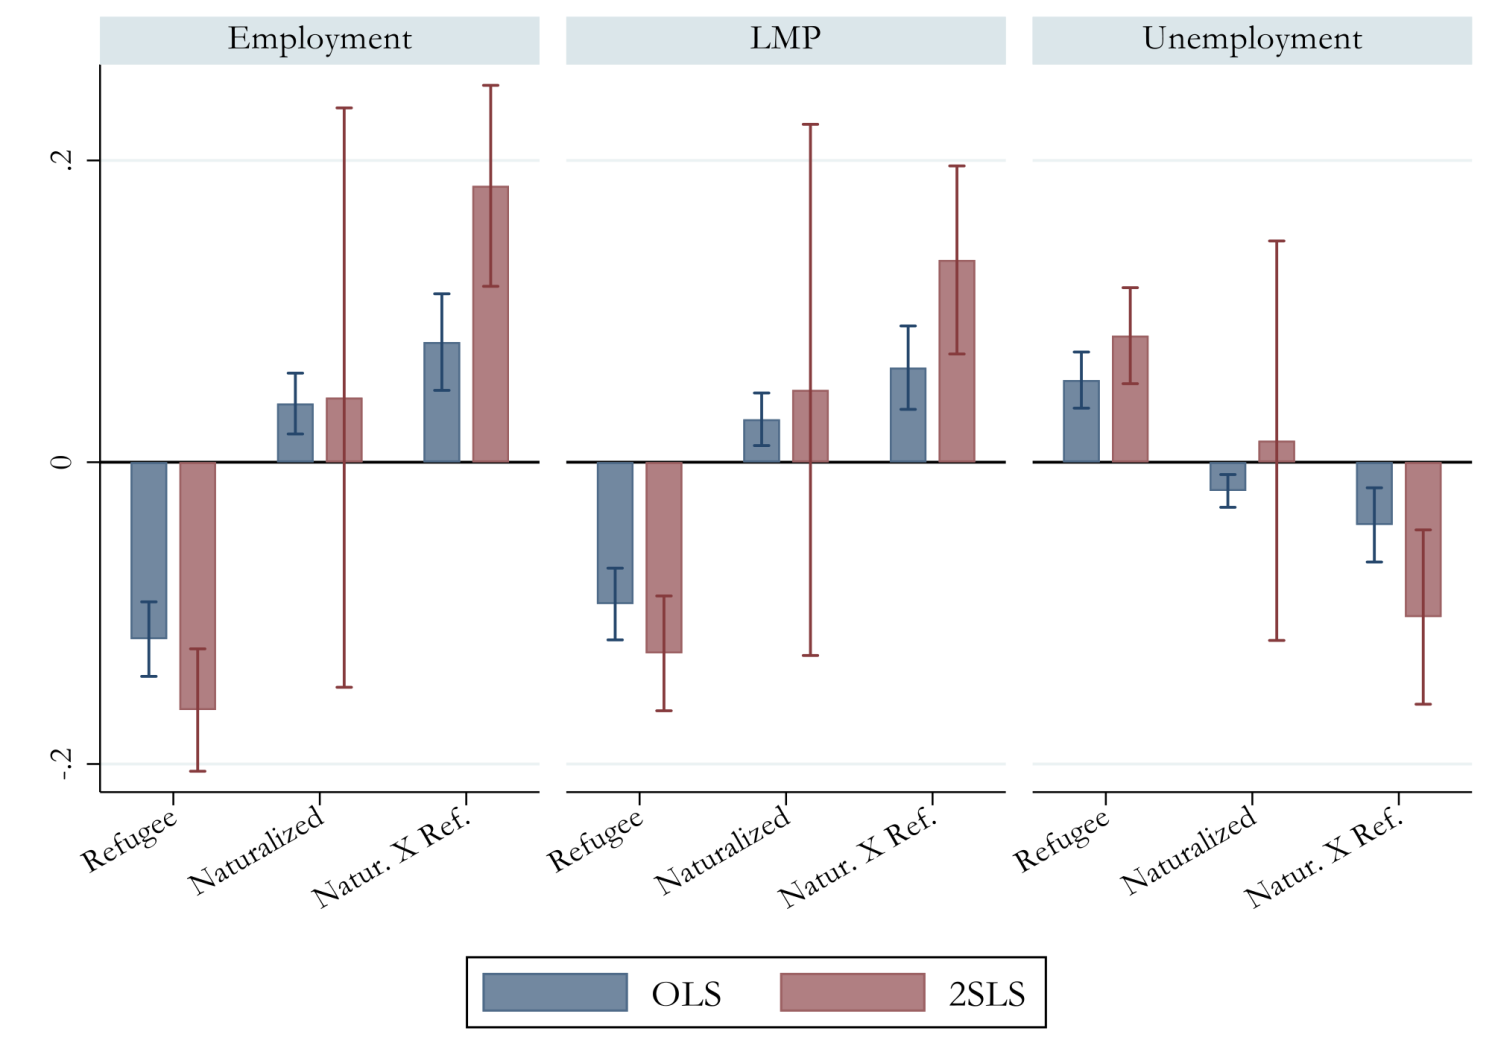 Figure 1 Naturalisation and labour market outcomes: OLS and 2SLS